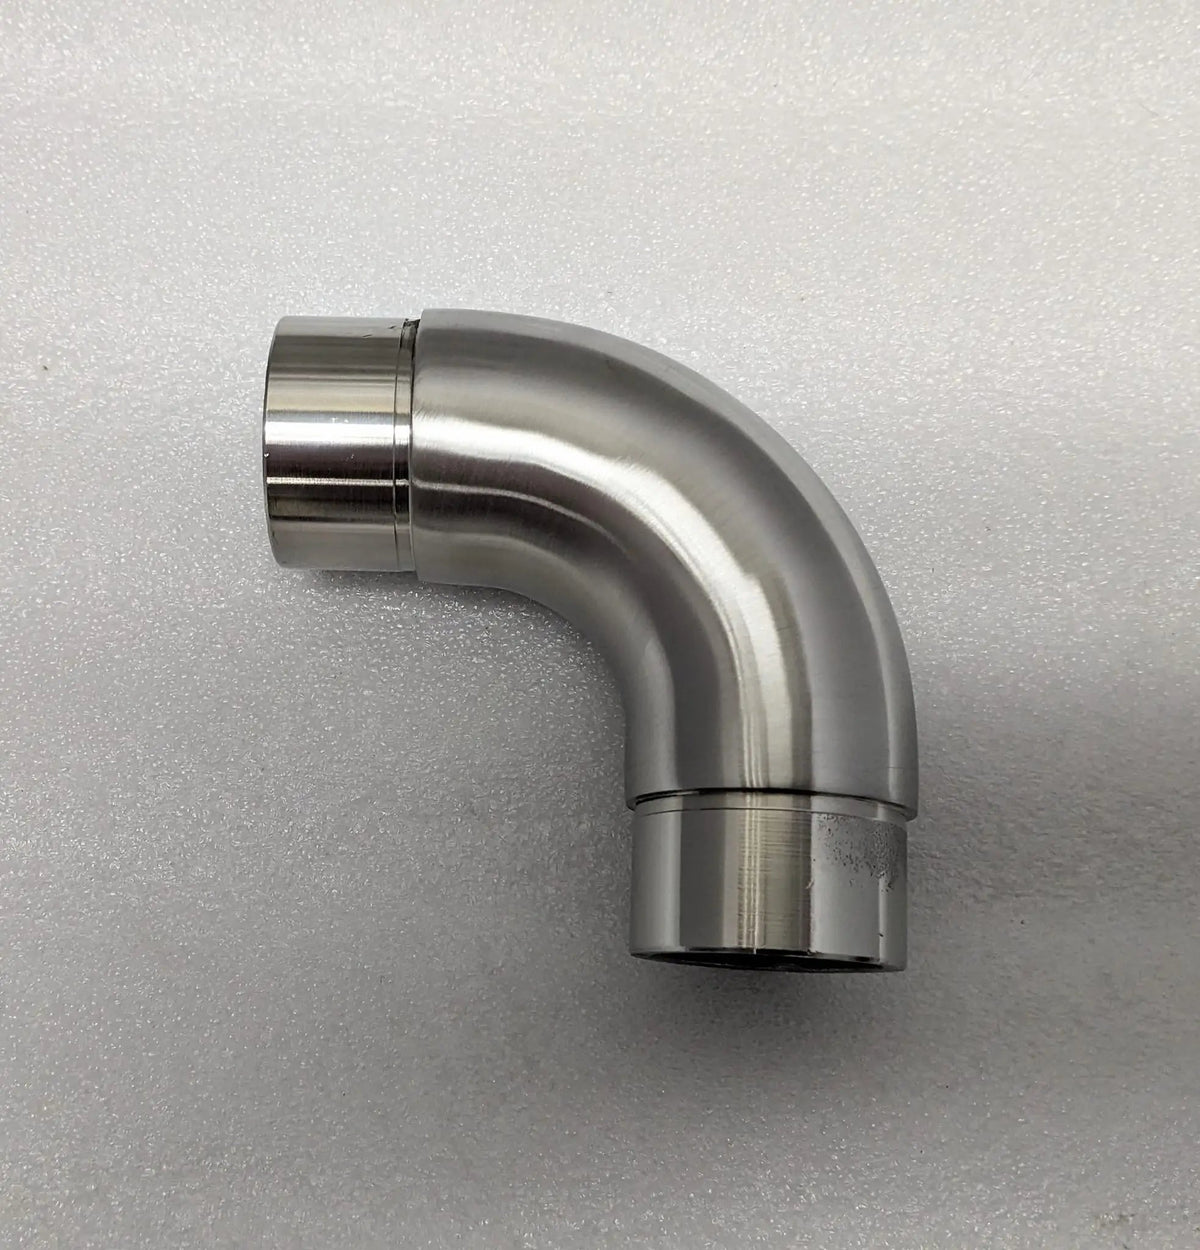 Flush Curved Elbow for 1-1/2" Tubing FLUSH FITTING,COMPONENTS FOR 1-1/2" OD TUBING BrushedStainlessSteel Trade Diversified